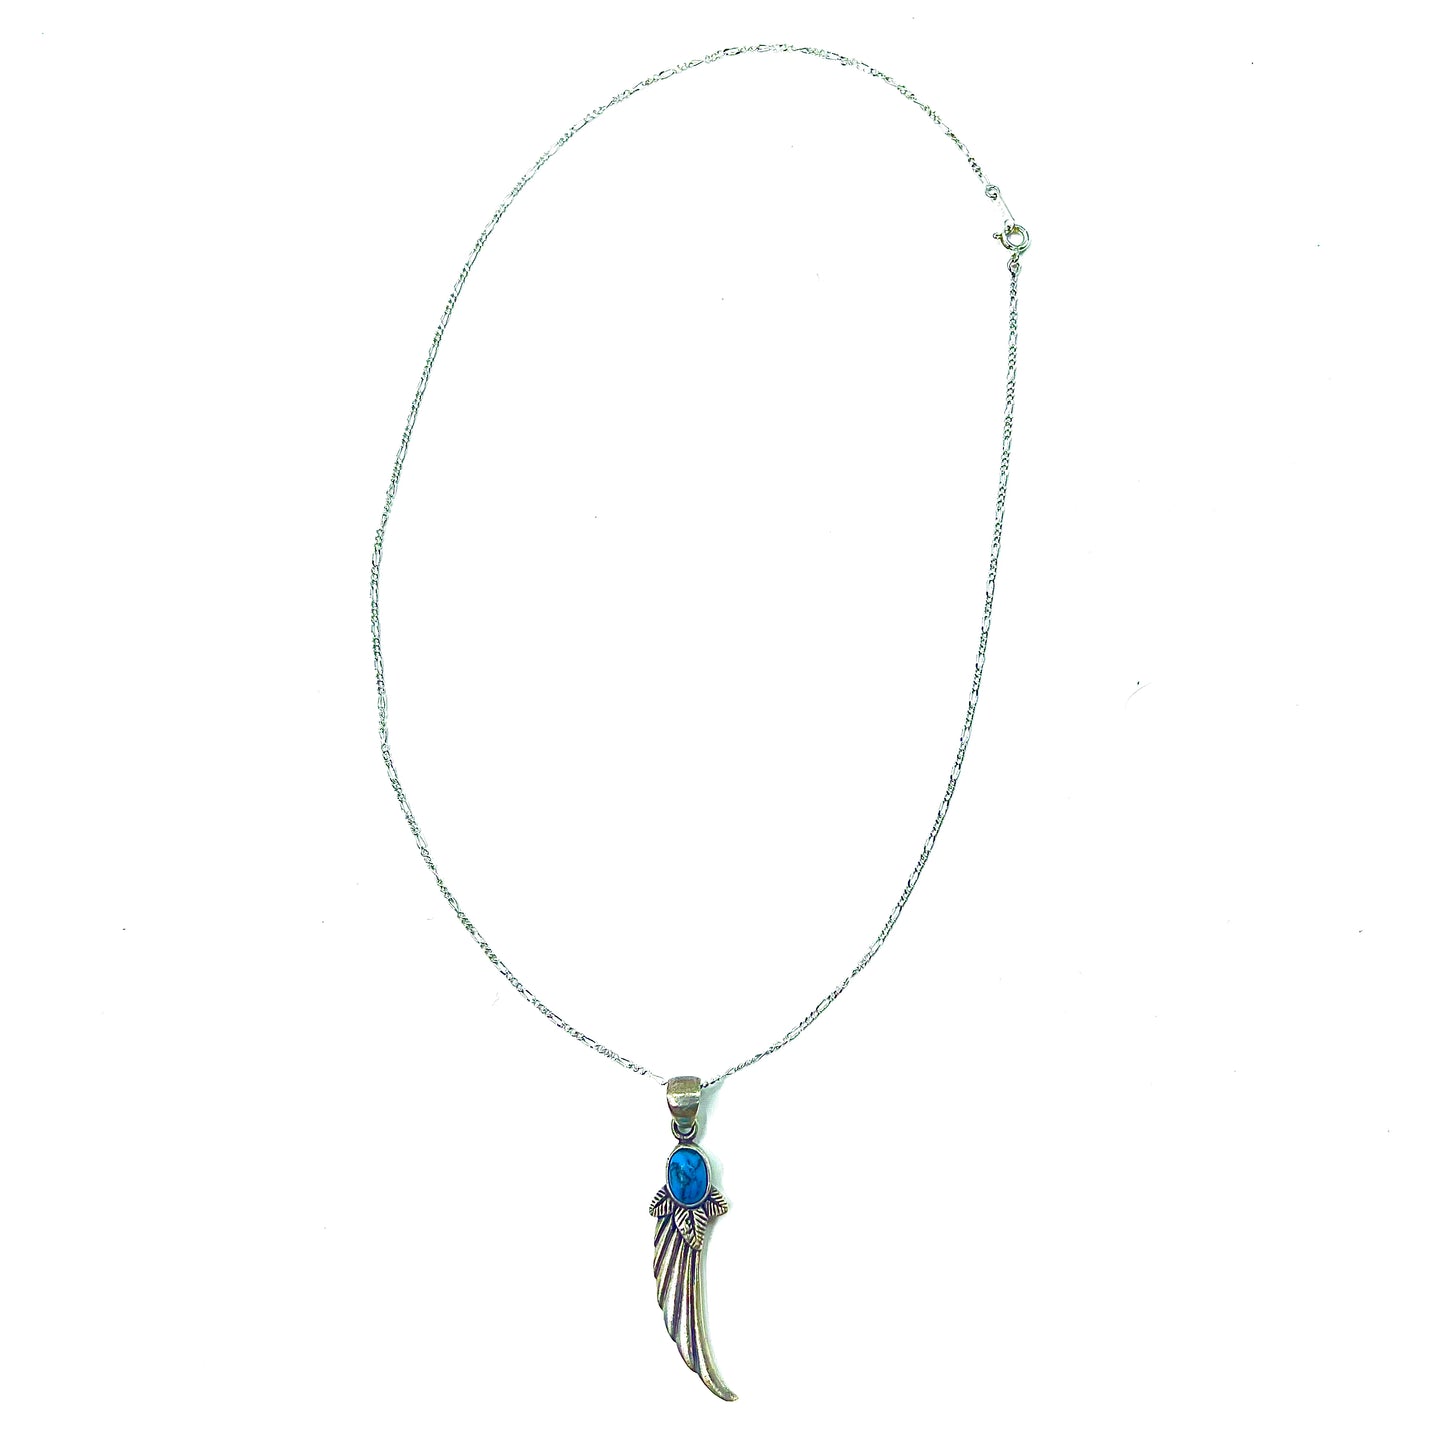 Silver Feather Necklace シルバー フェザーネックレス ターコイズ SILVER 925 フィガロチェーン